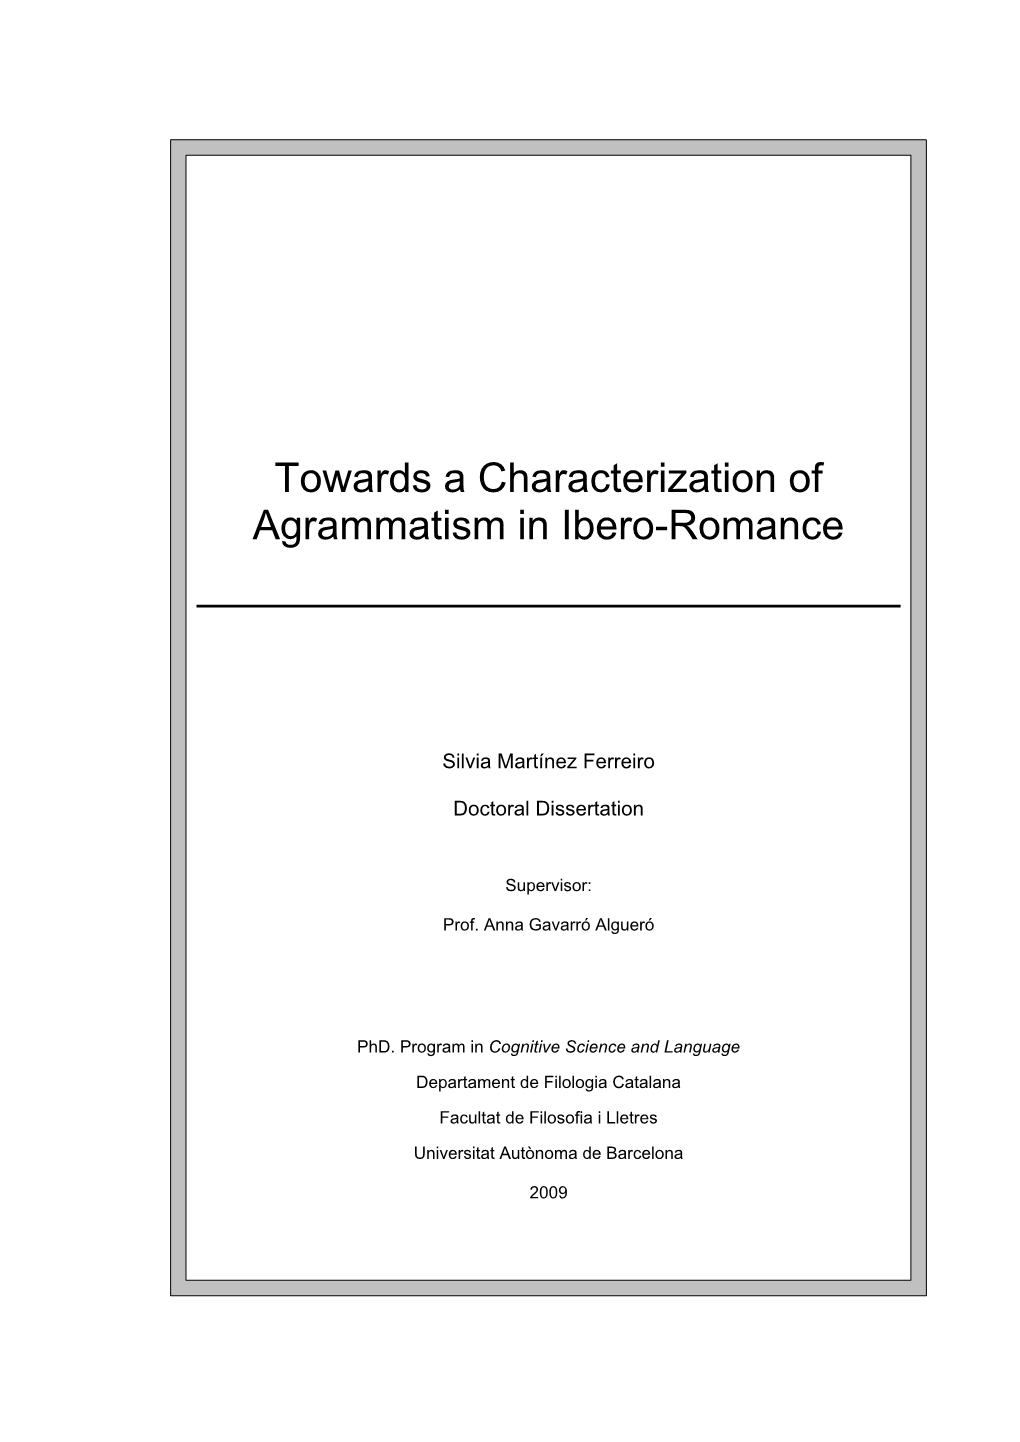 Towards a Characterization of Agrammatism in Ibero-Romance